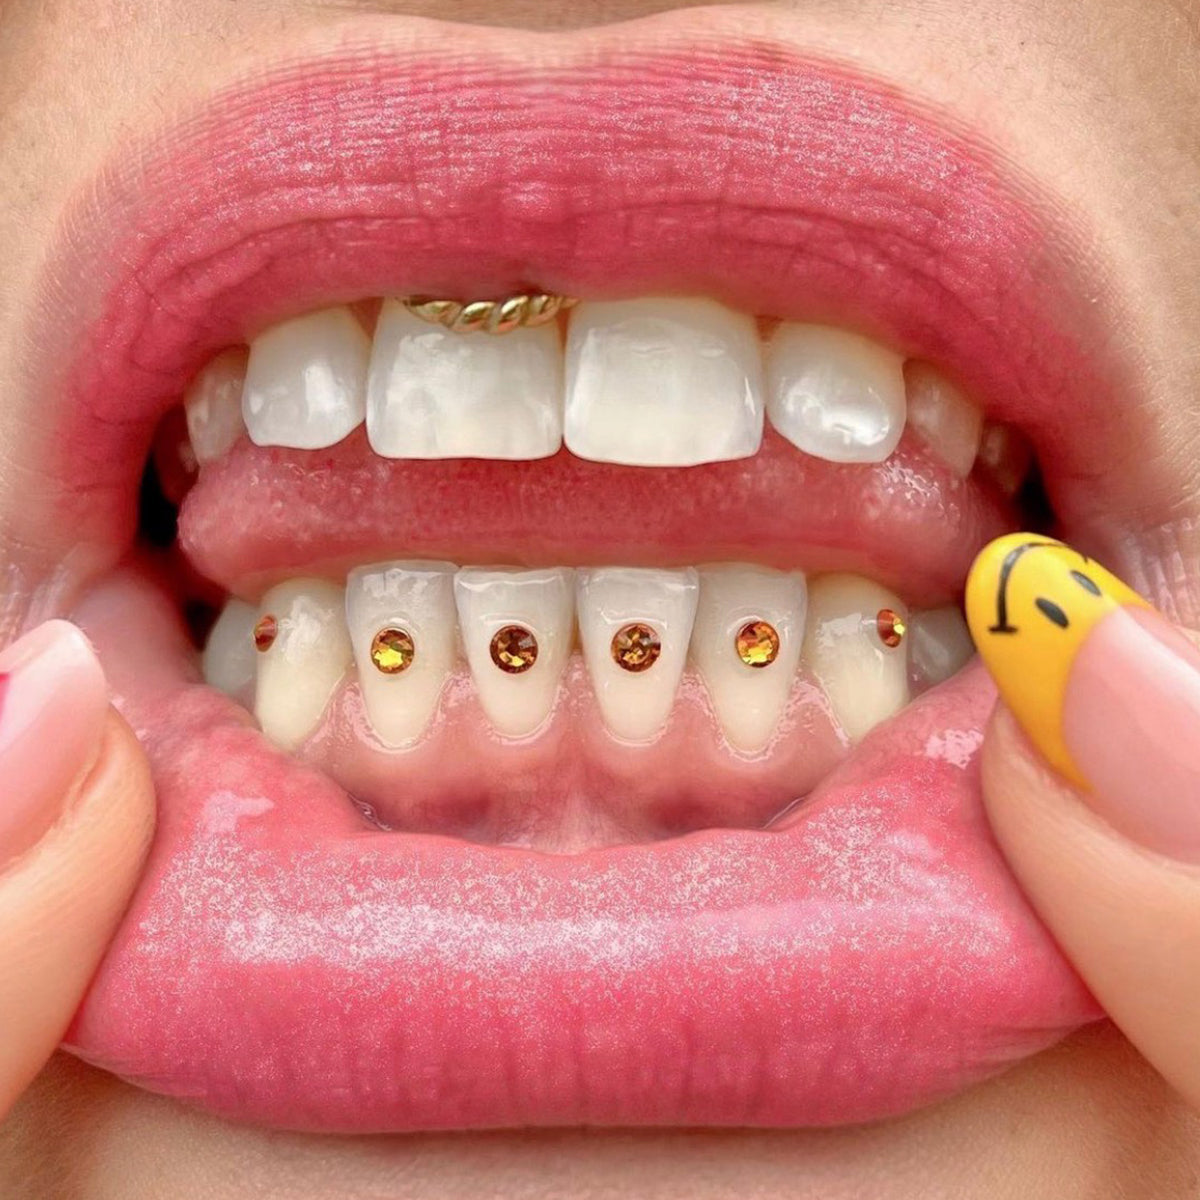 Model is wearing "All That Glitters Is Gold" on the bottom middle teeth and "Bumble Bee" on the surrounding bottom teeth.